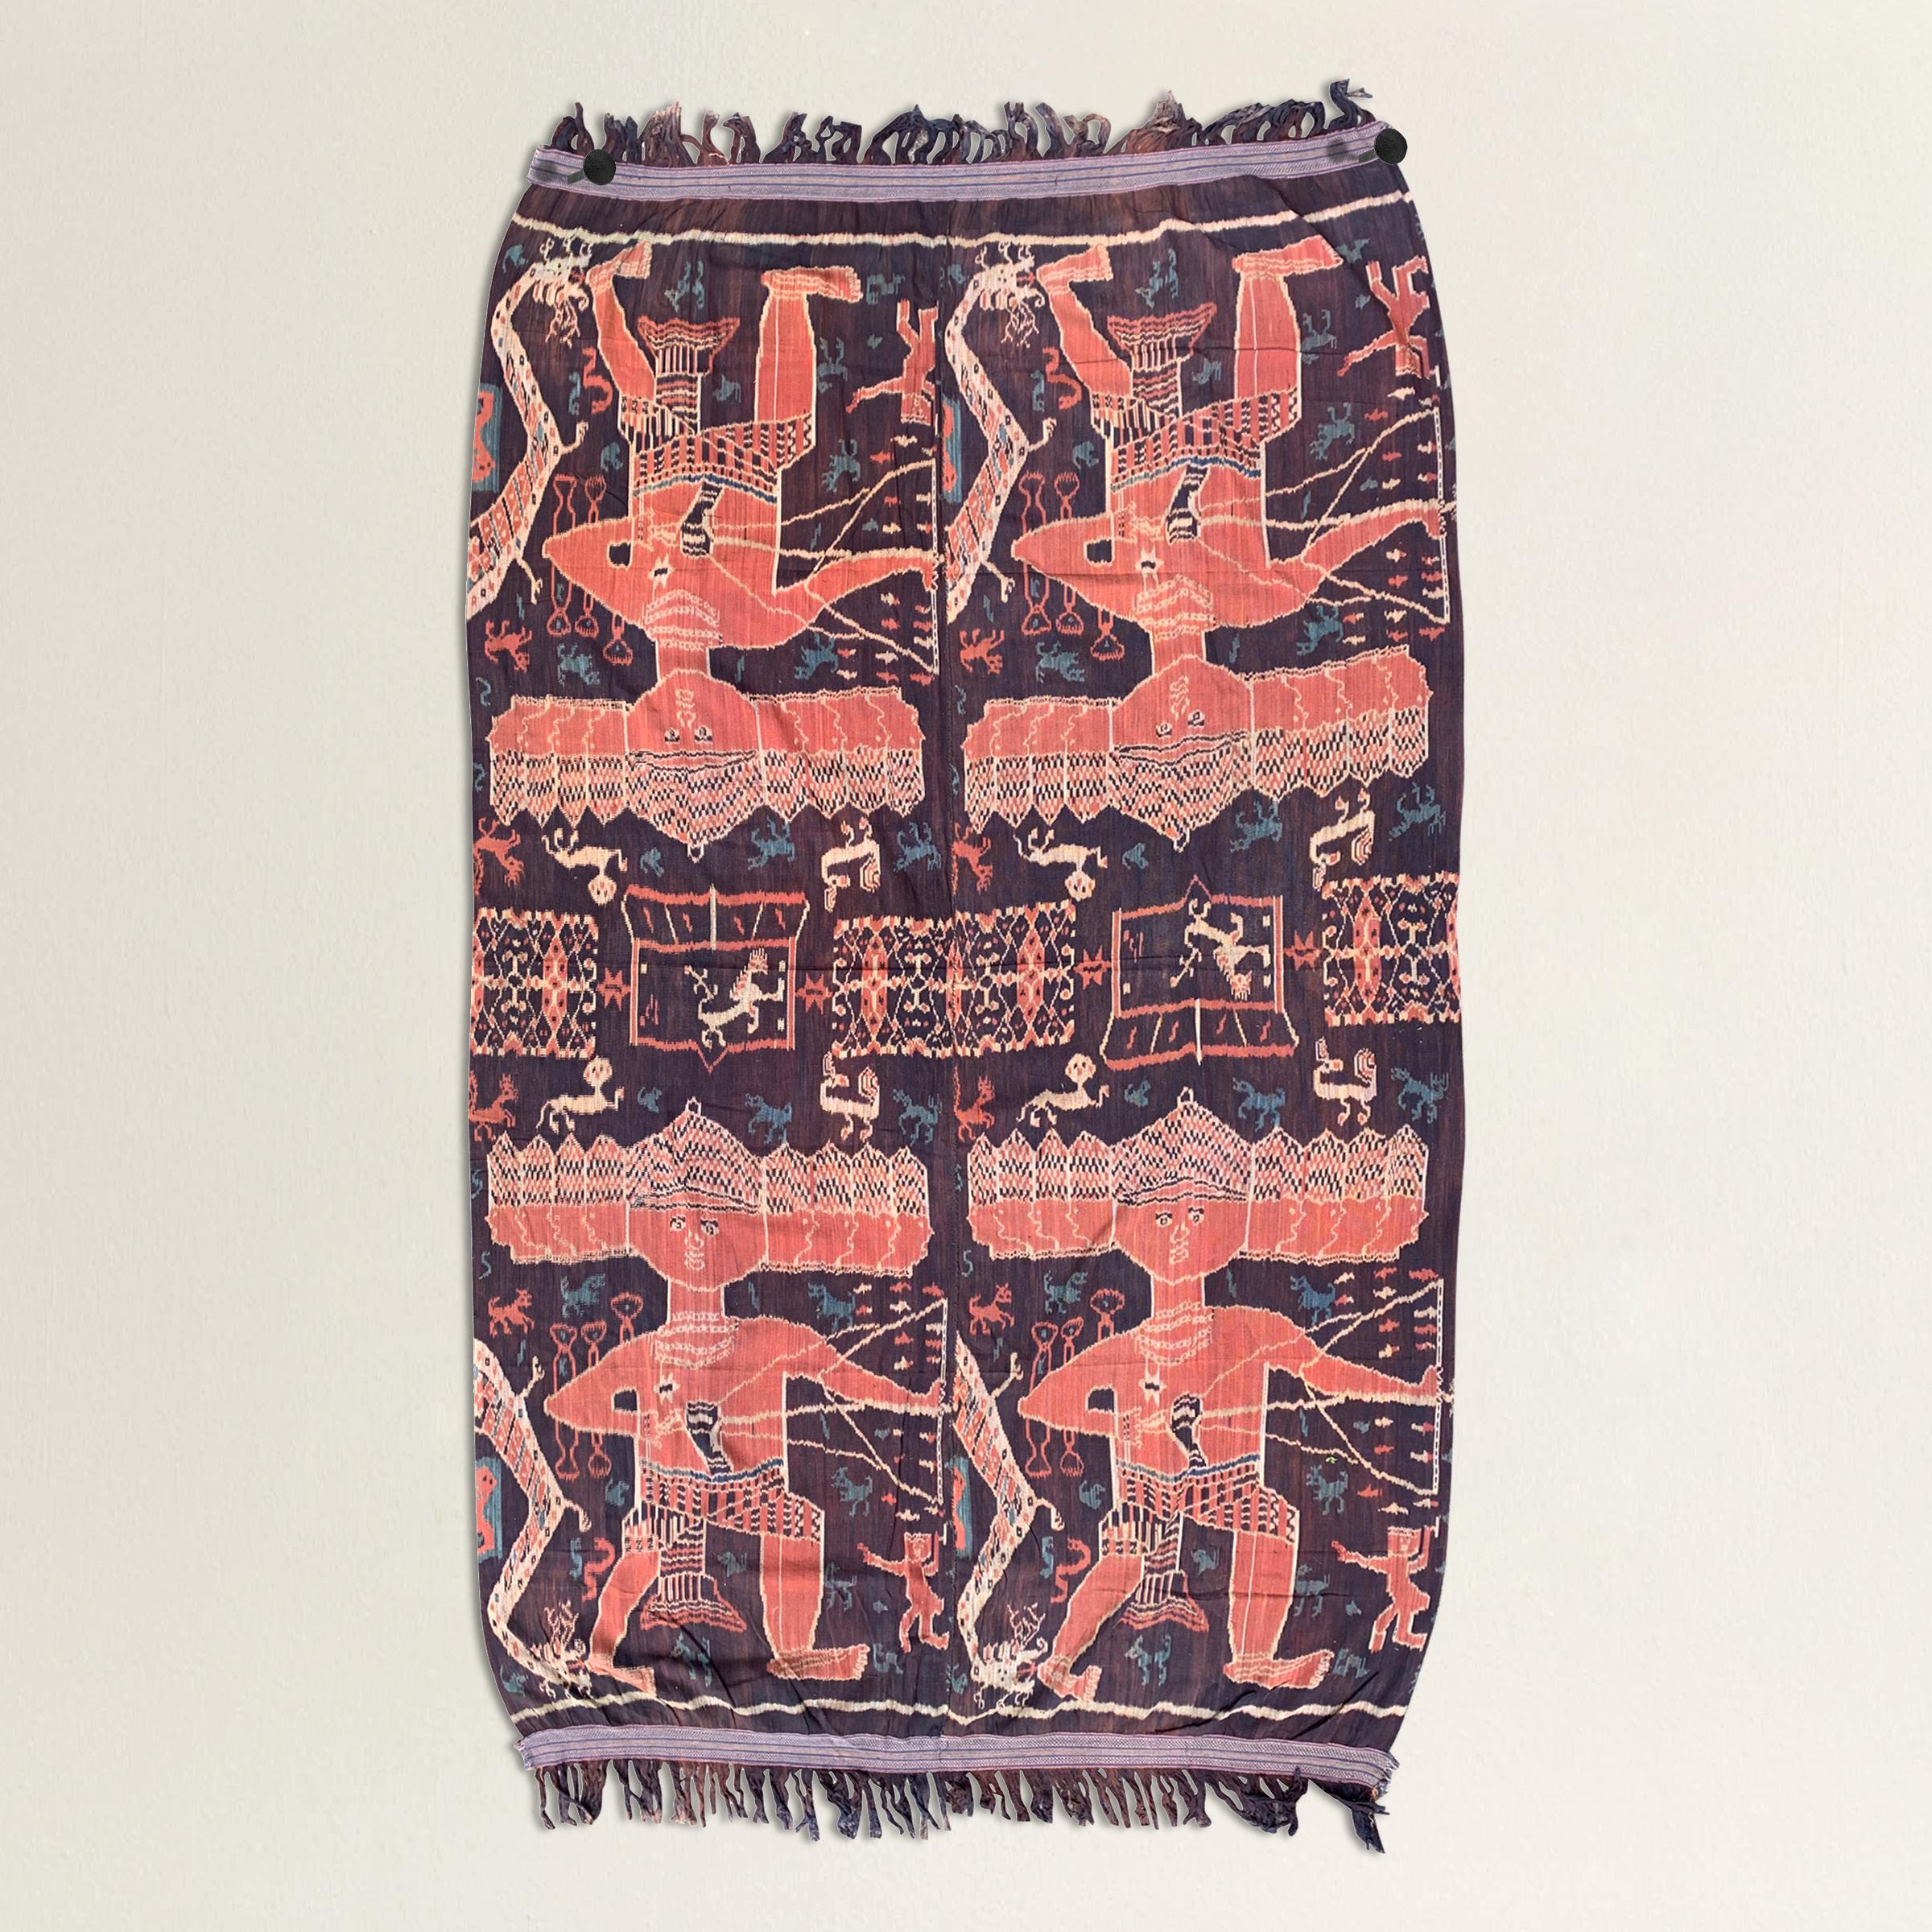 An incredible 20th century Indonesian hand-loomed ikat textile from the island of Sumba and depicting a hunting scene with several large multi-headed figures carrying bows and arrows, amidst a field with lions, birds, and serpents, all woven in